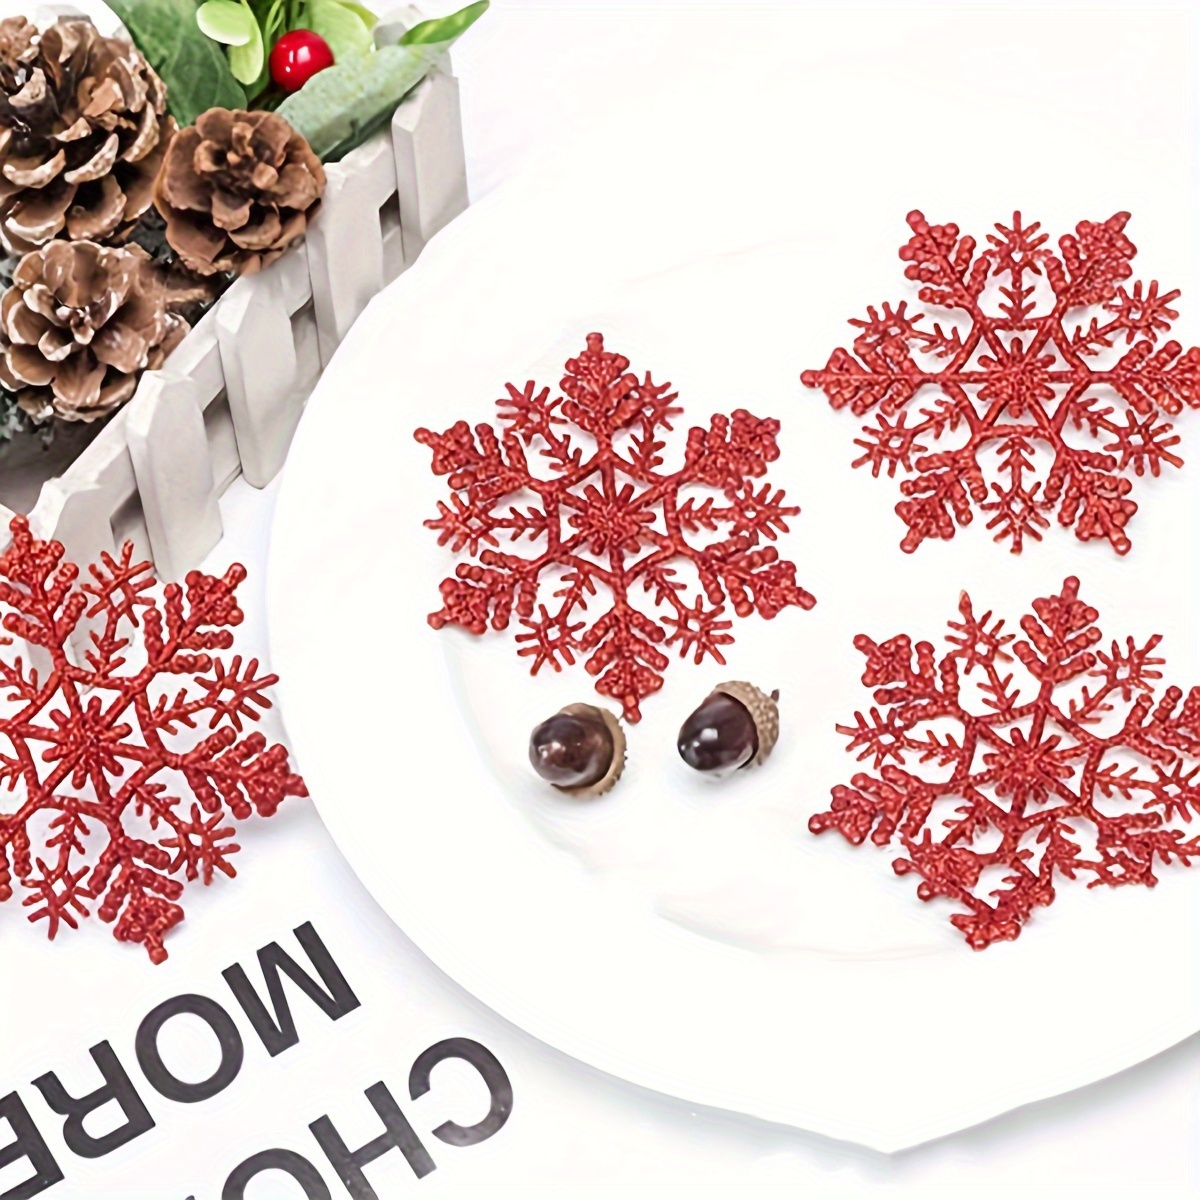 HOLIDAY TIME 3pc Red & Silver Glitter SNOWFLAKE Table or Hanging Decor  -New!